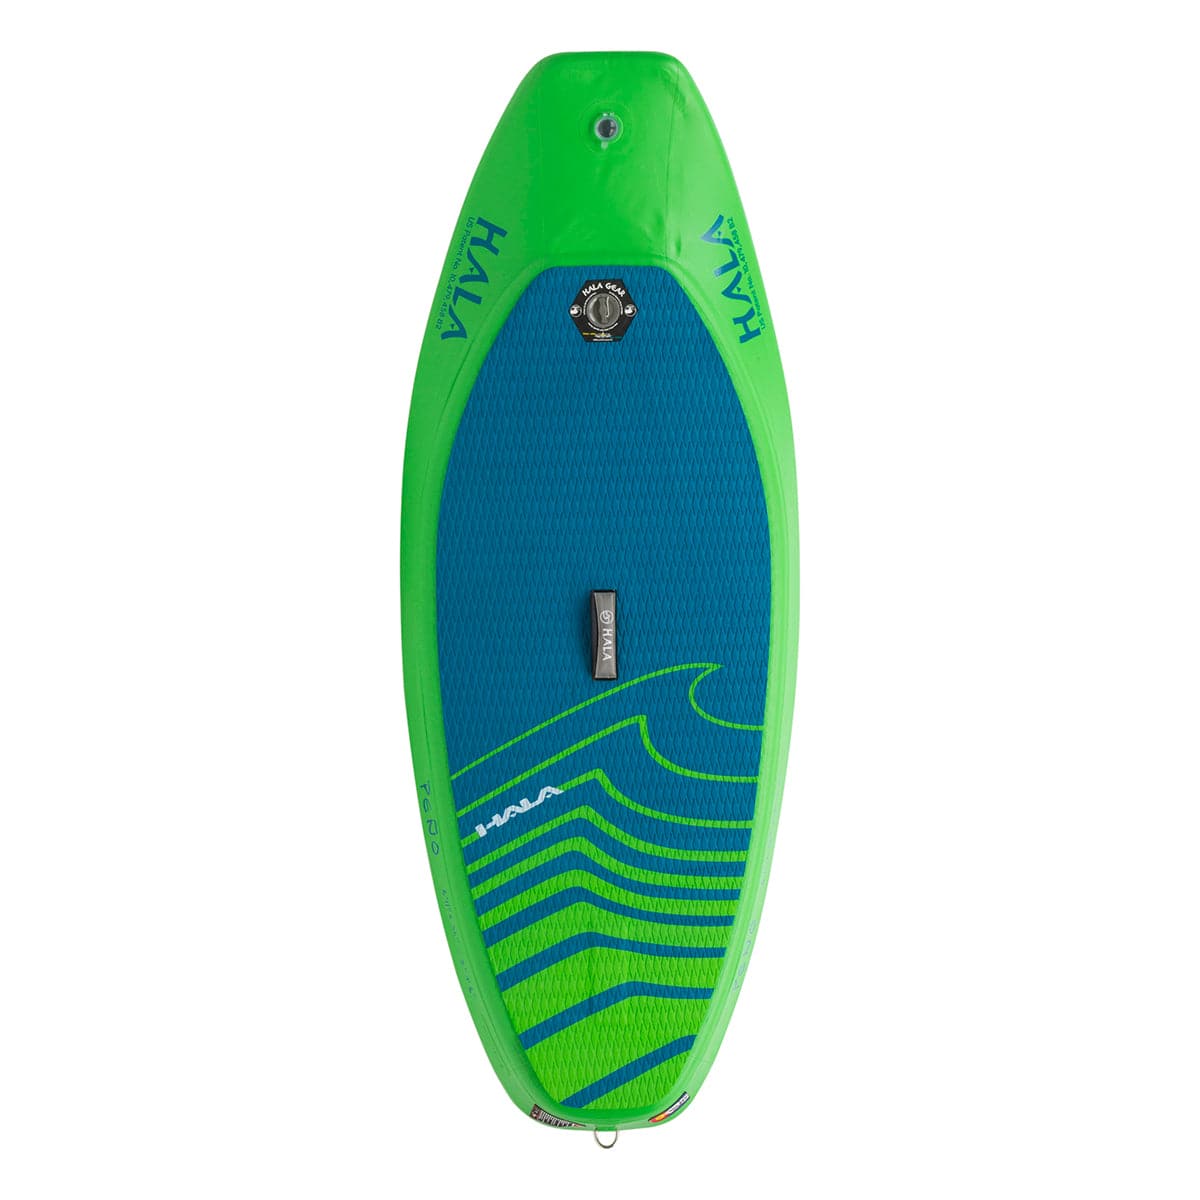 Featuring the Peño 6'11 Inflatable Surf SUP whitewater sup manufactured by Hala shown here from one angle.